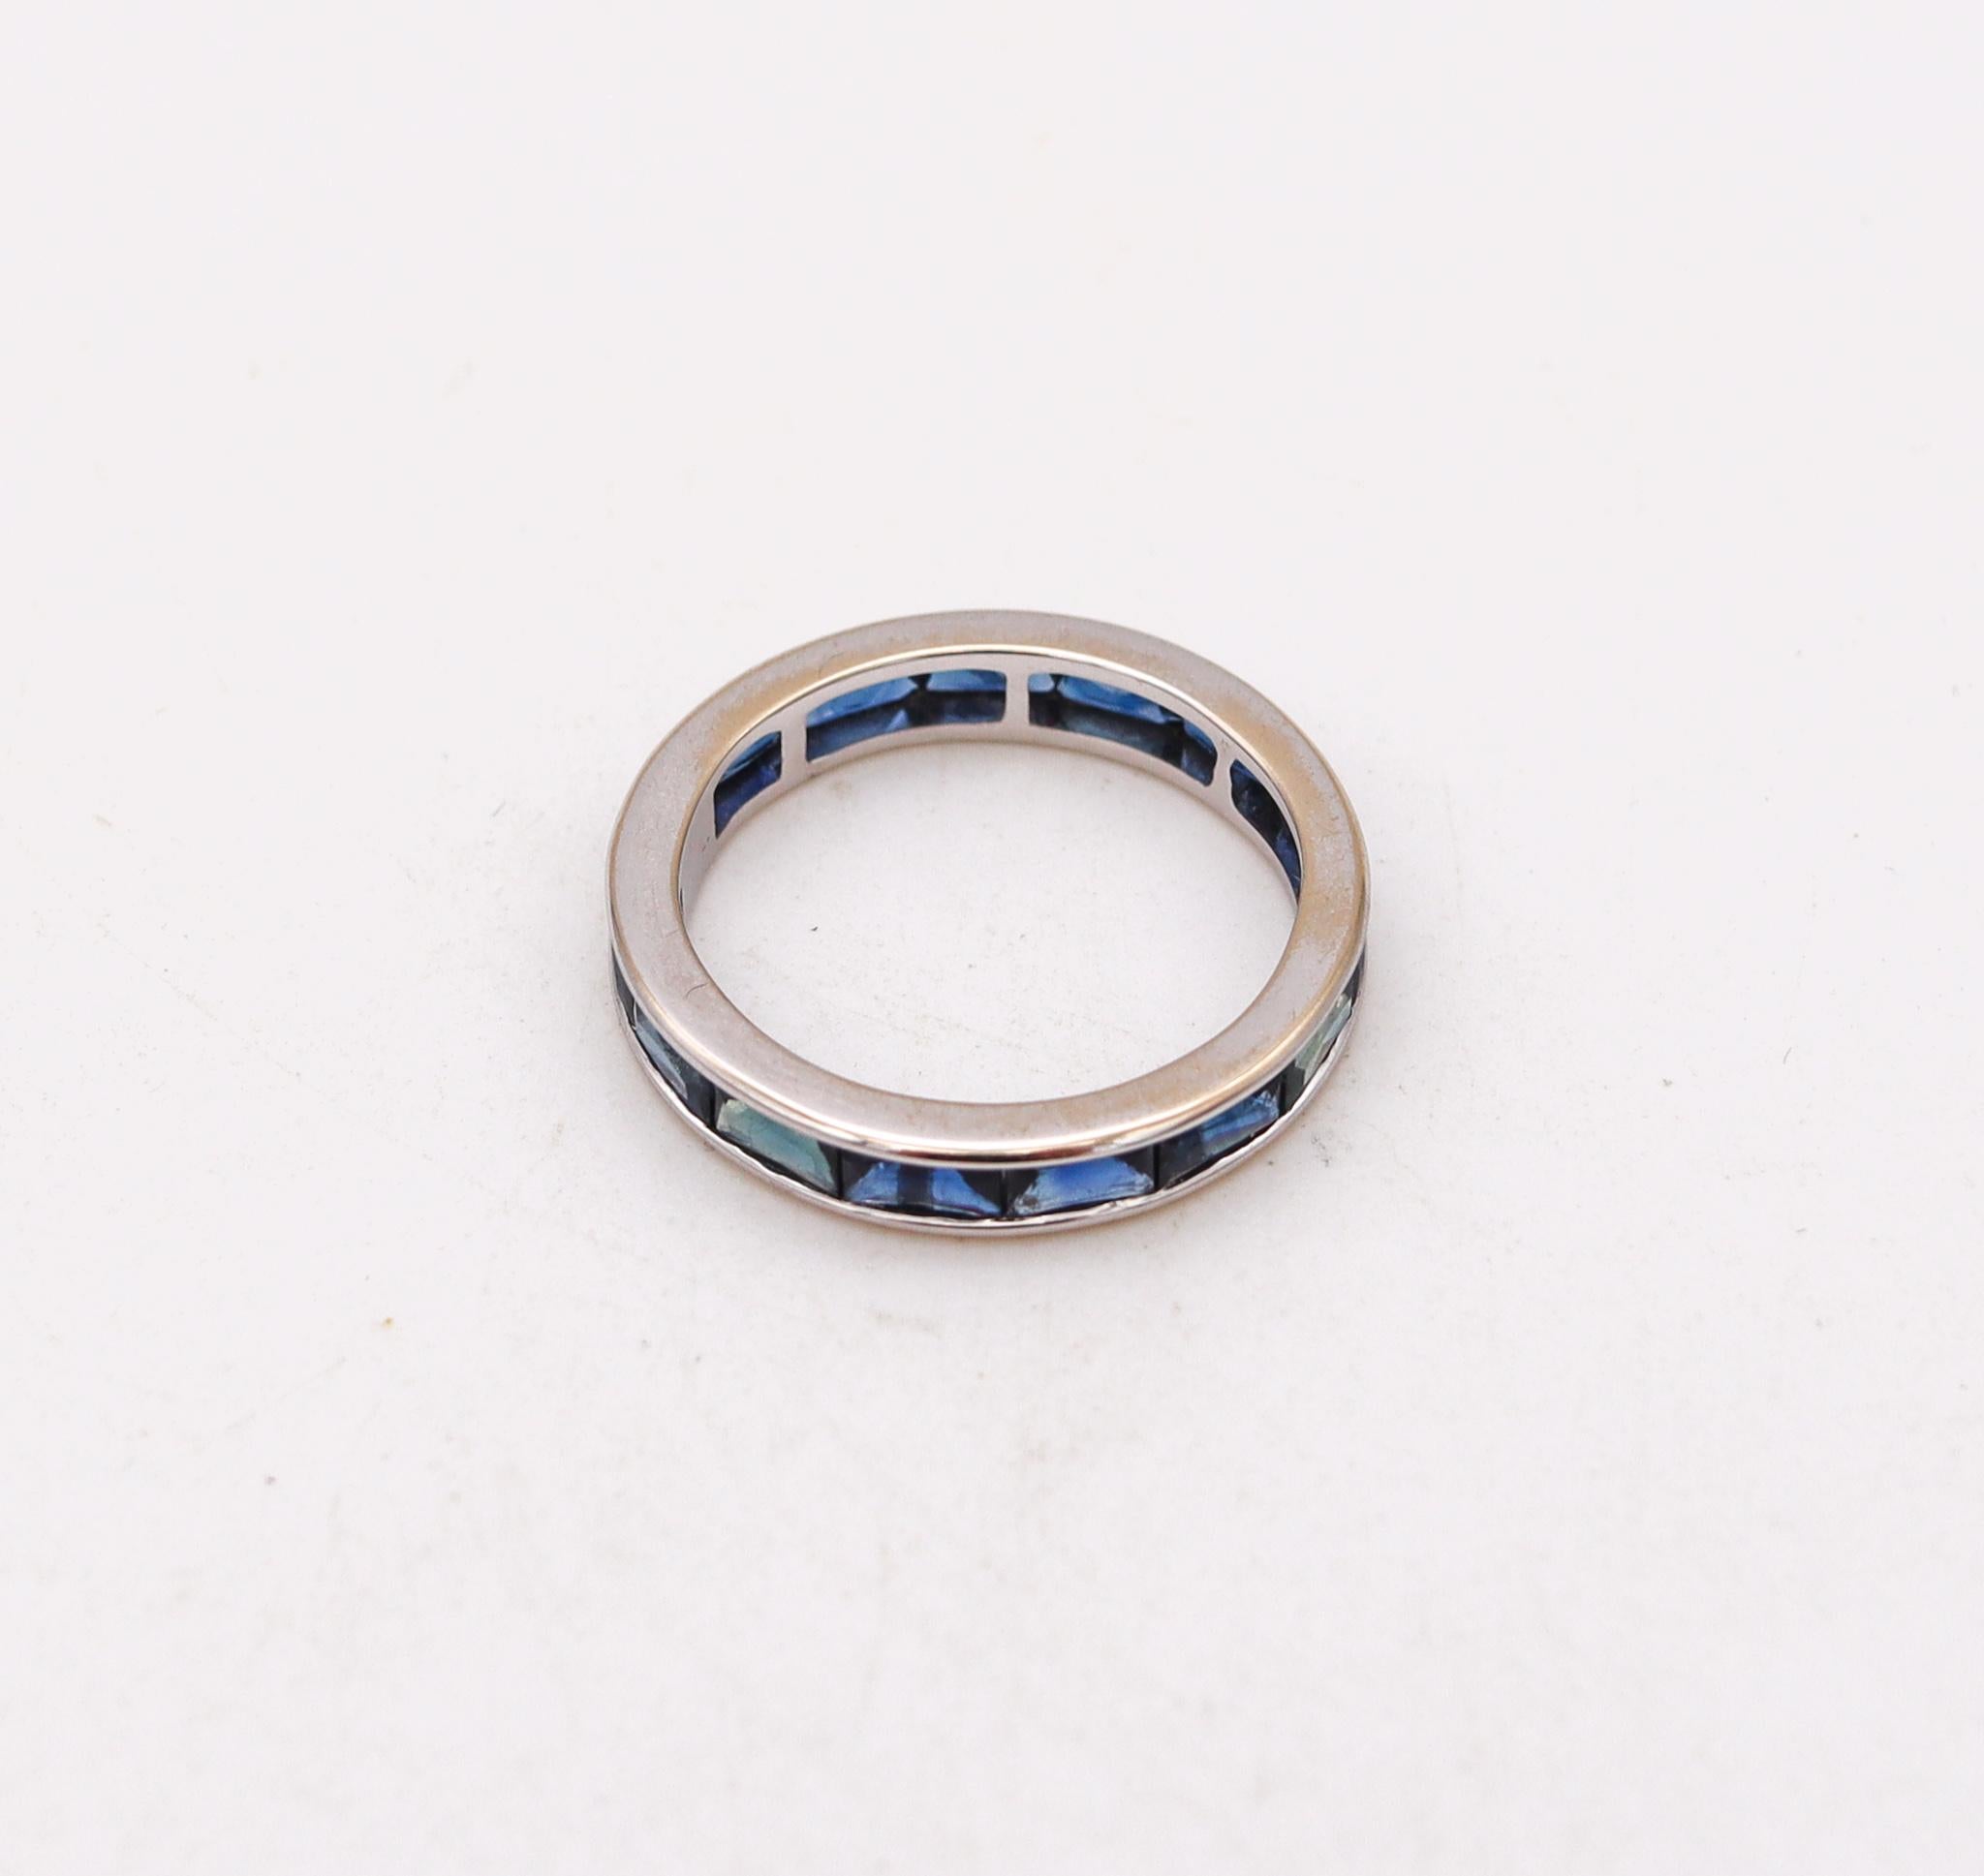 An eternity band with Sapphires baguettes.

Classic contemporary eternity ring, crafted in solid white gold of 18 karats, with high polished finish. It is mount in a channel-set, with 14 French cut baguettes of natural blue sapphires with a combined